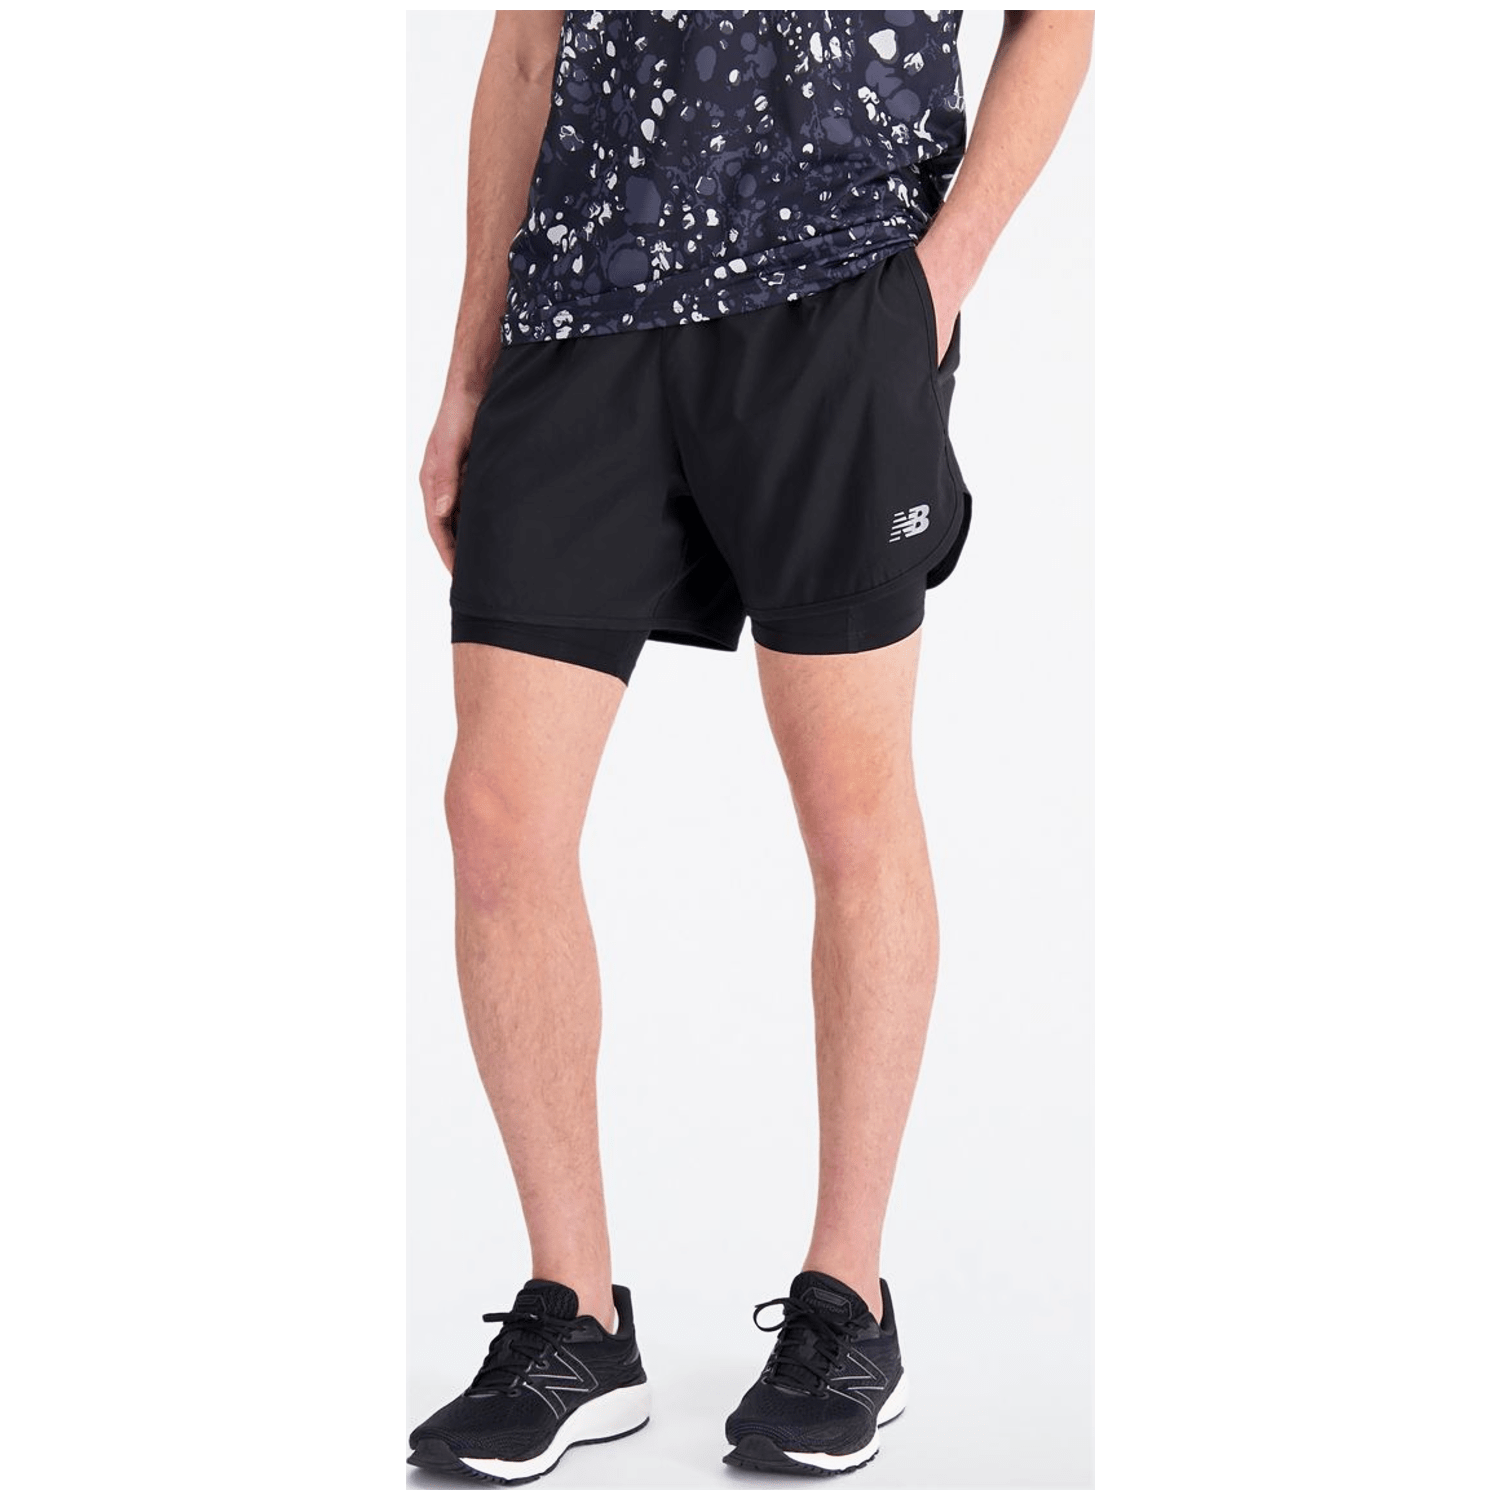 New Balance Accelerate Pacer 5 Inch 2-In-1 Herren Shorts